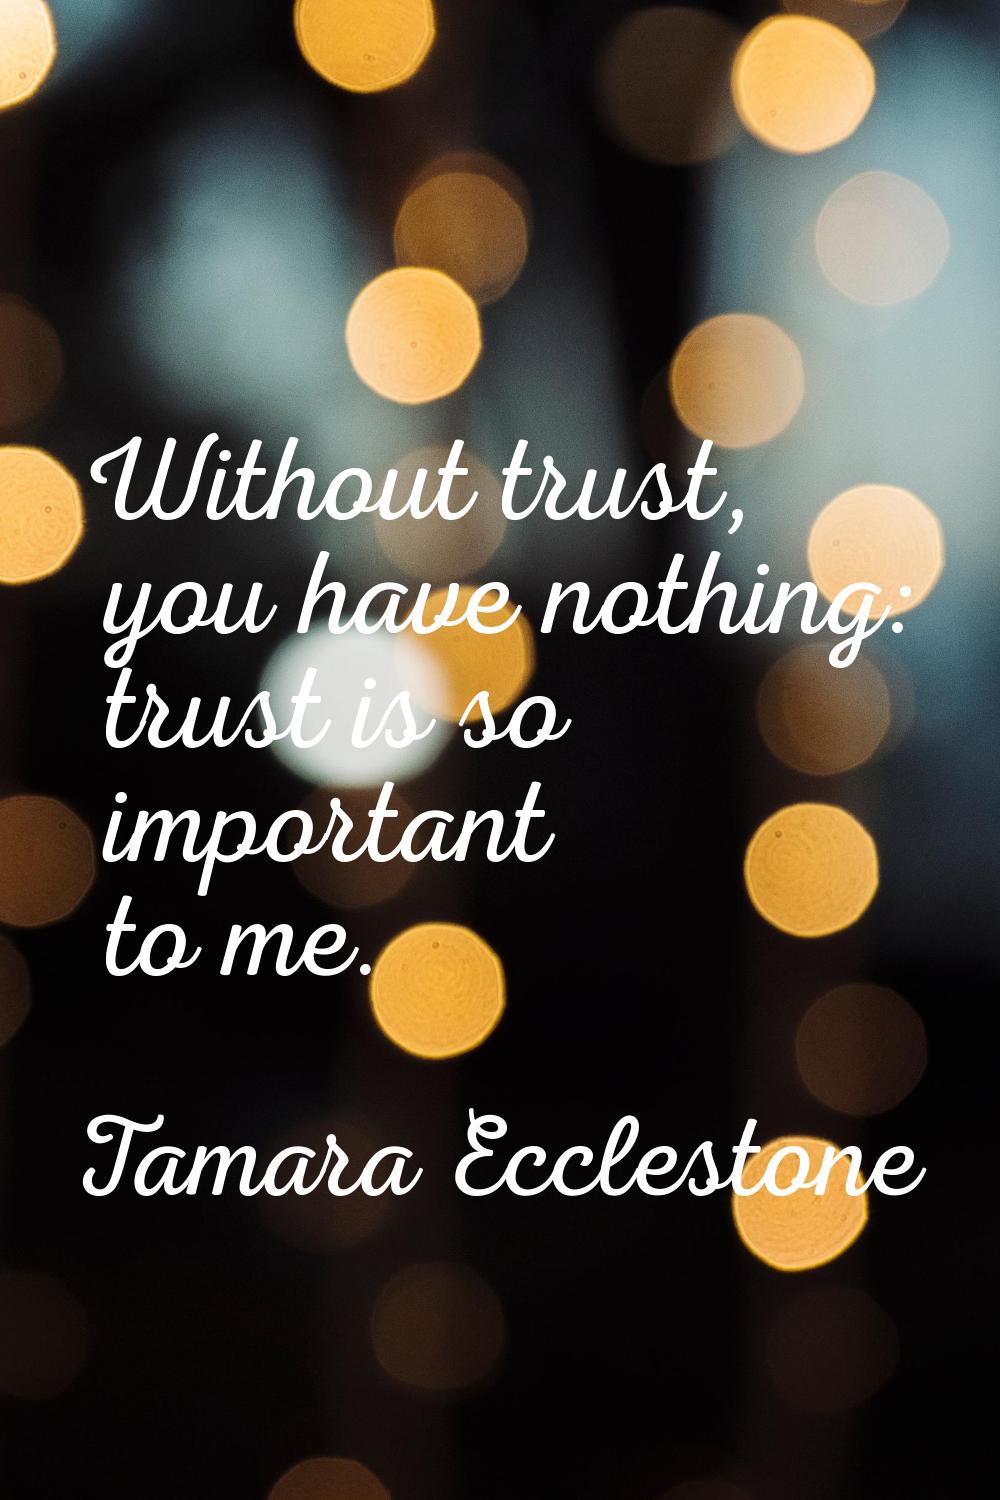 Without trust, you have nothing: trust is so important to me.